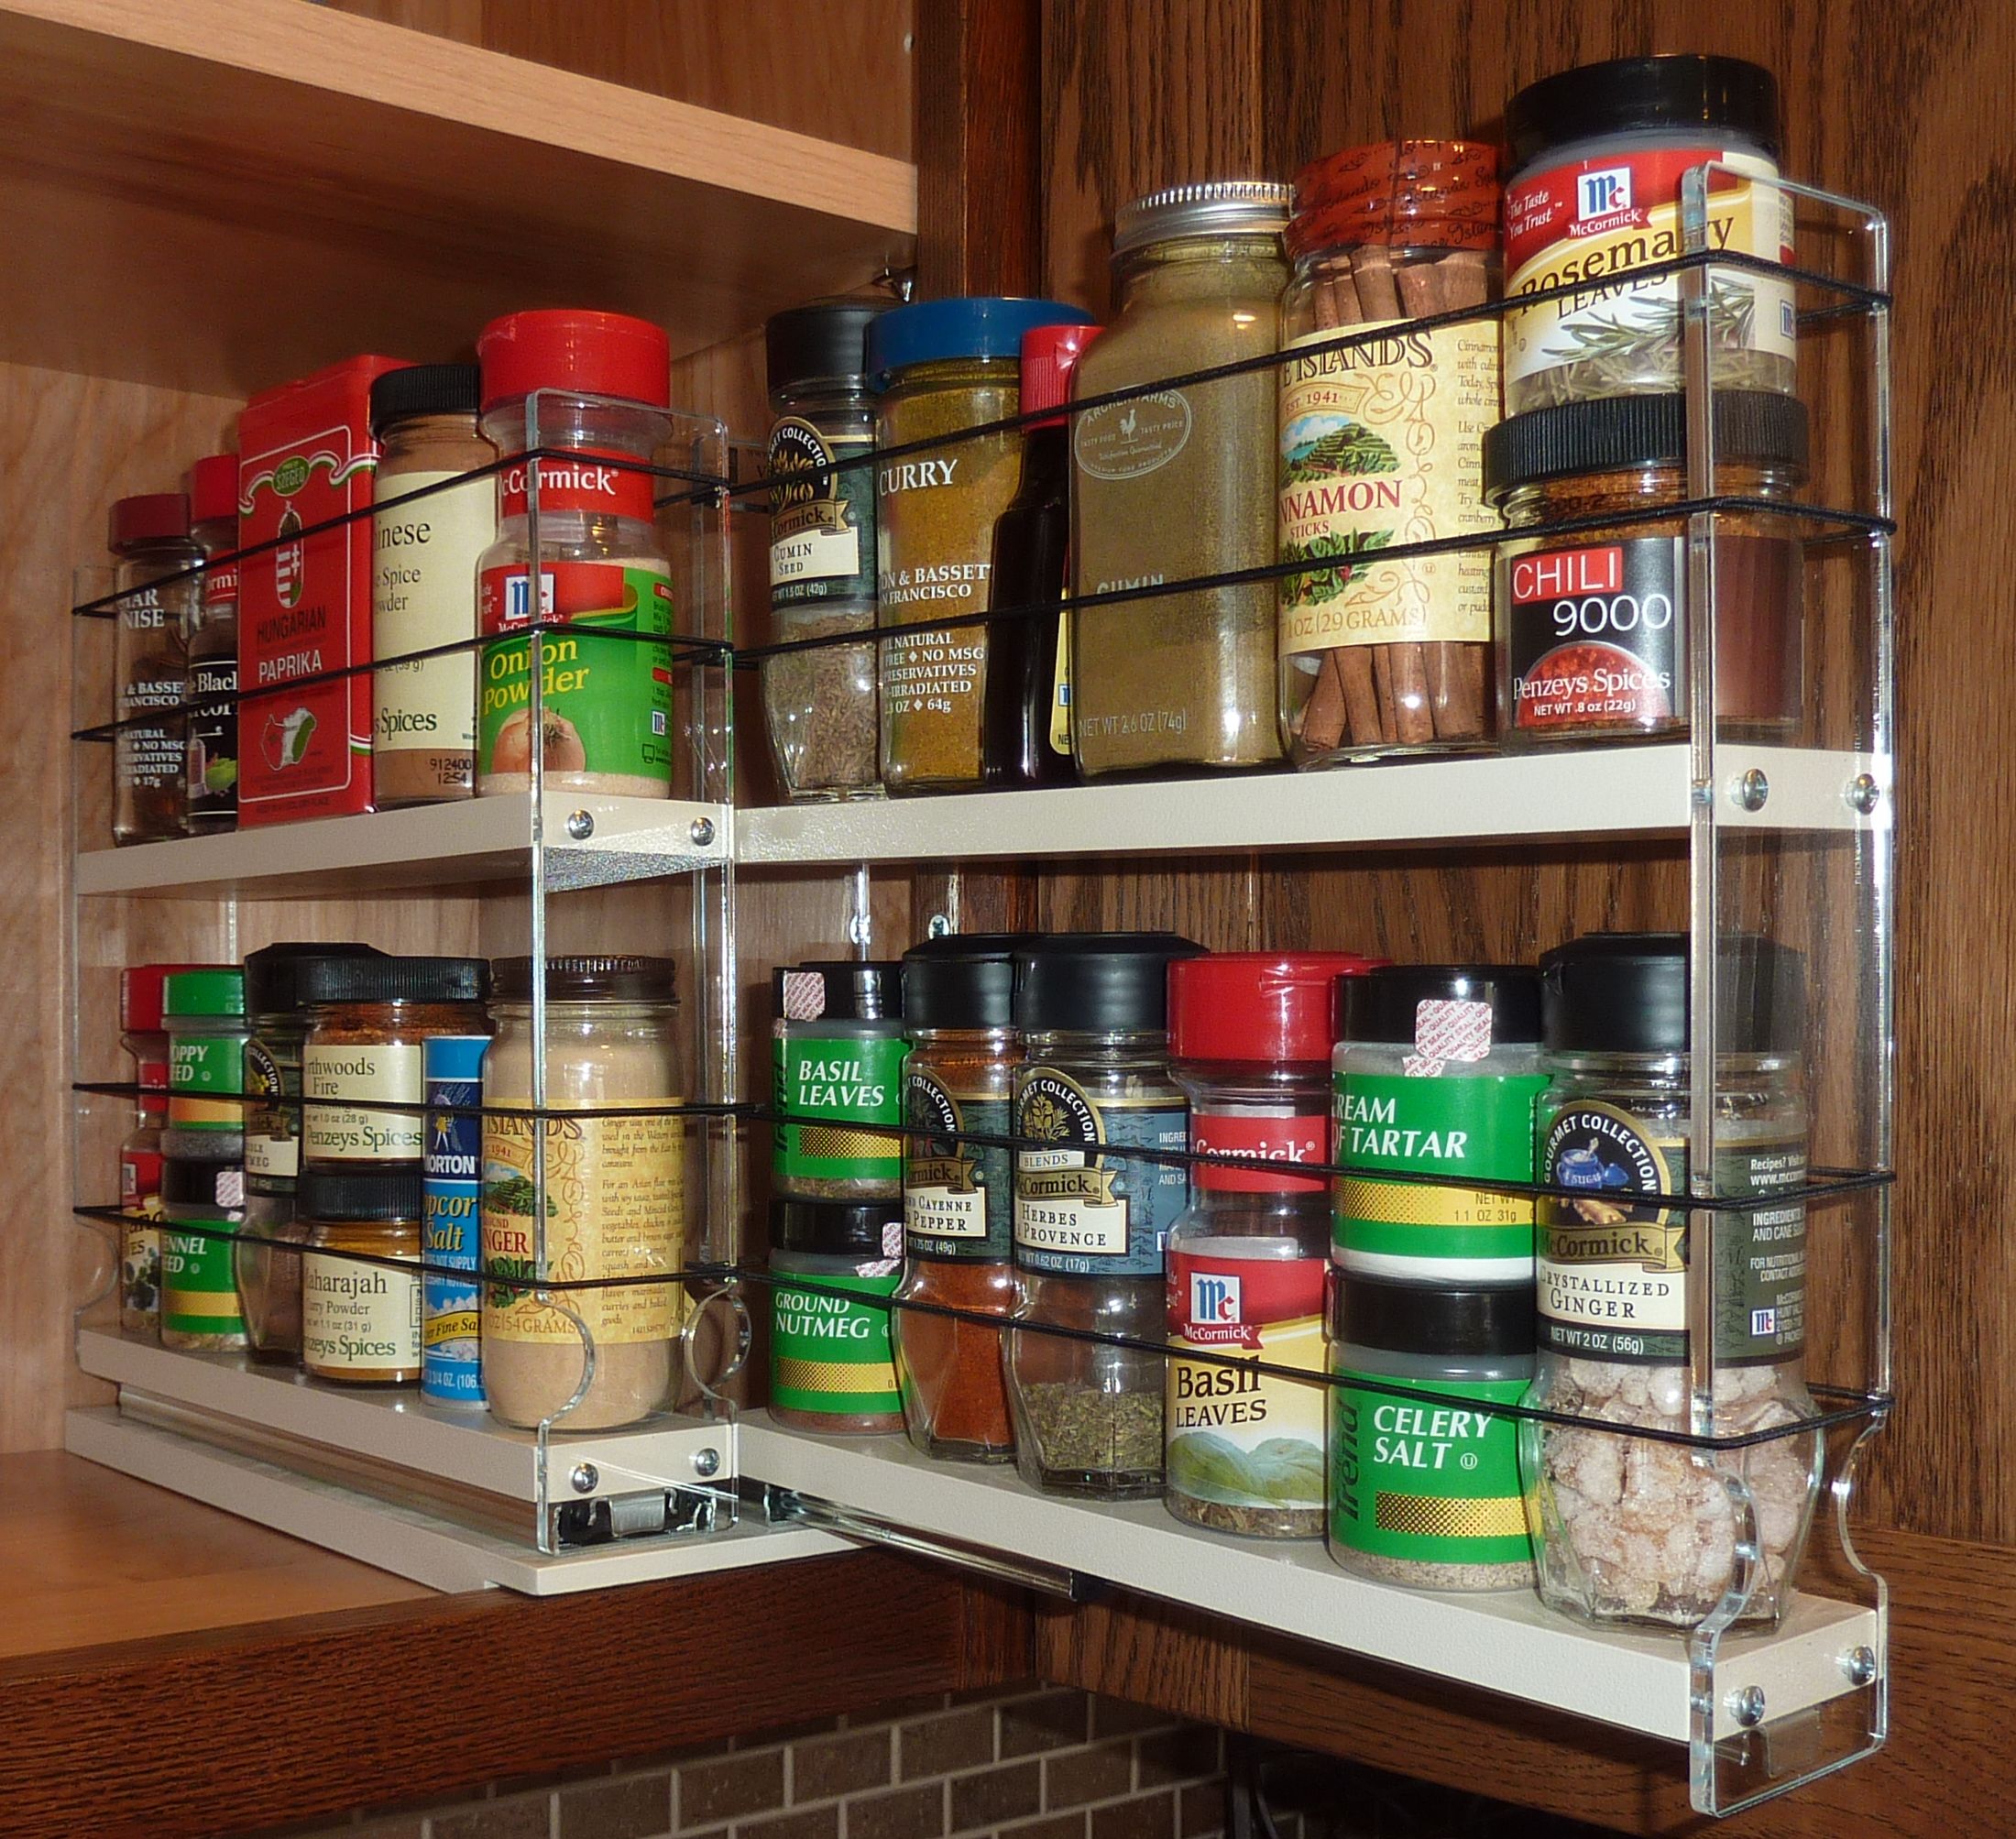 Cabinet Door Spice Racks | Pull Out Spice Racks | Spice ...